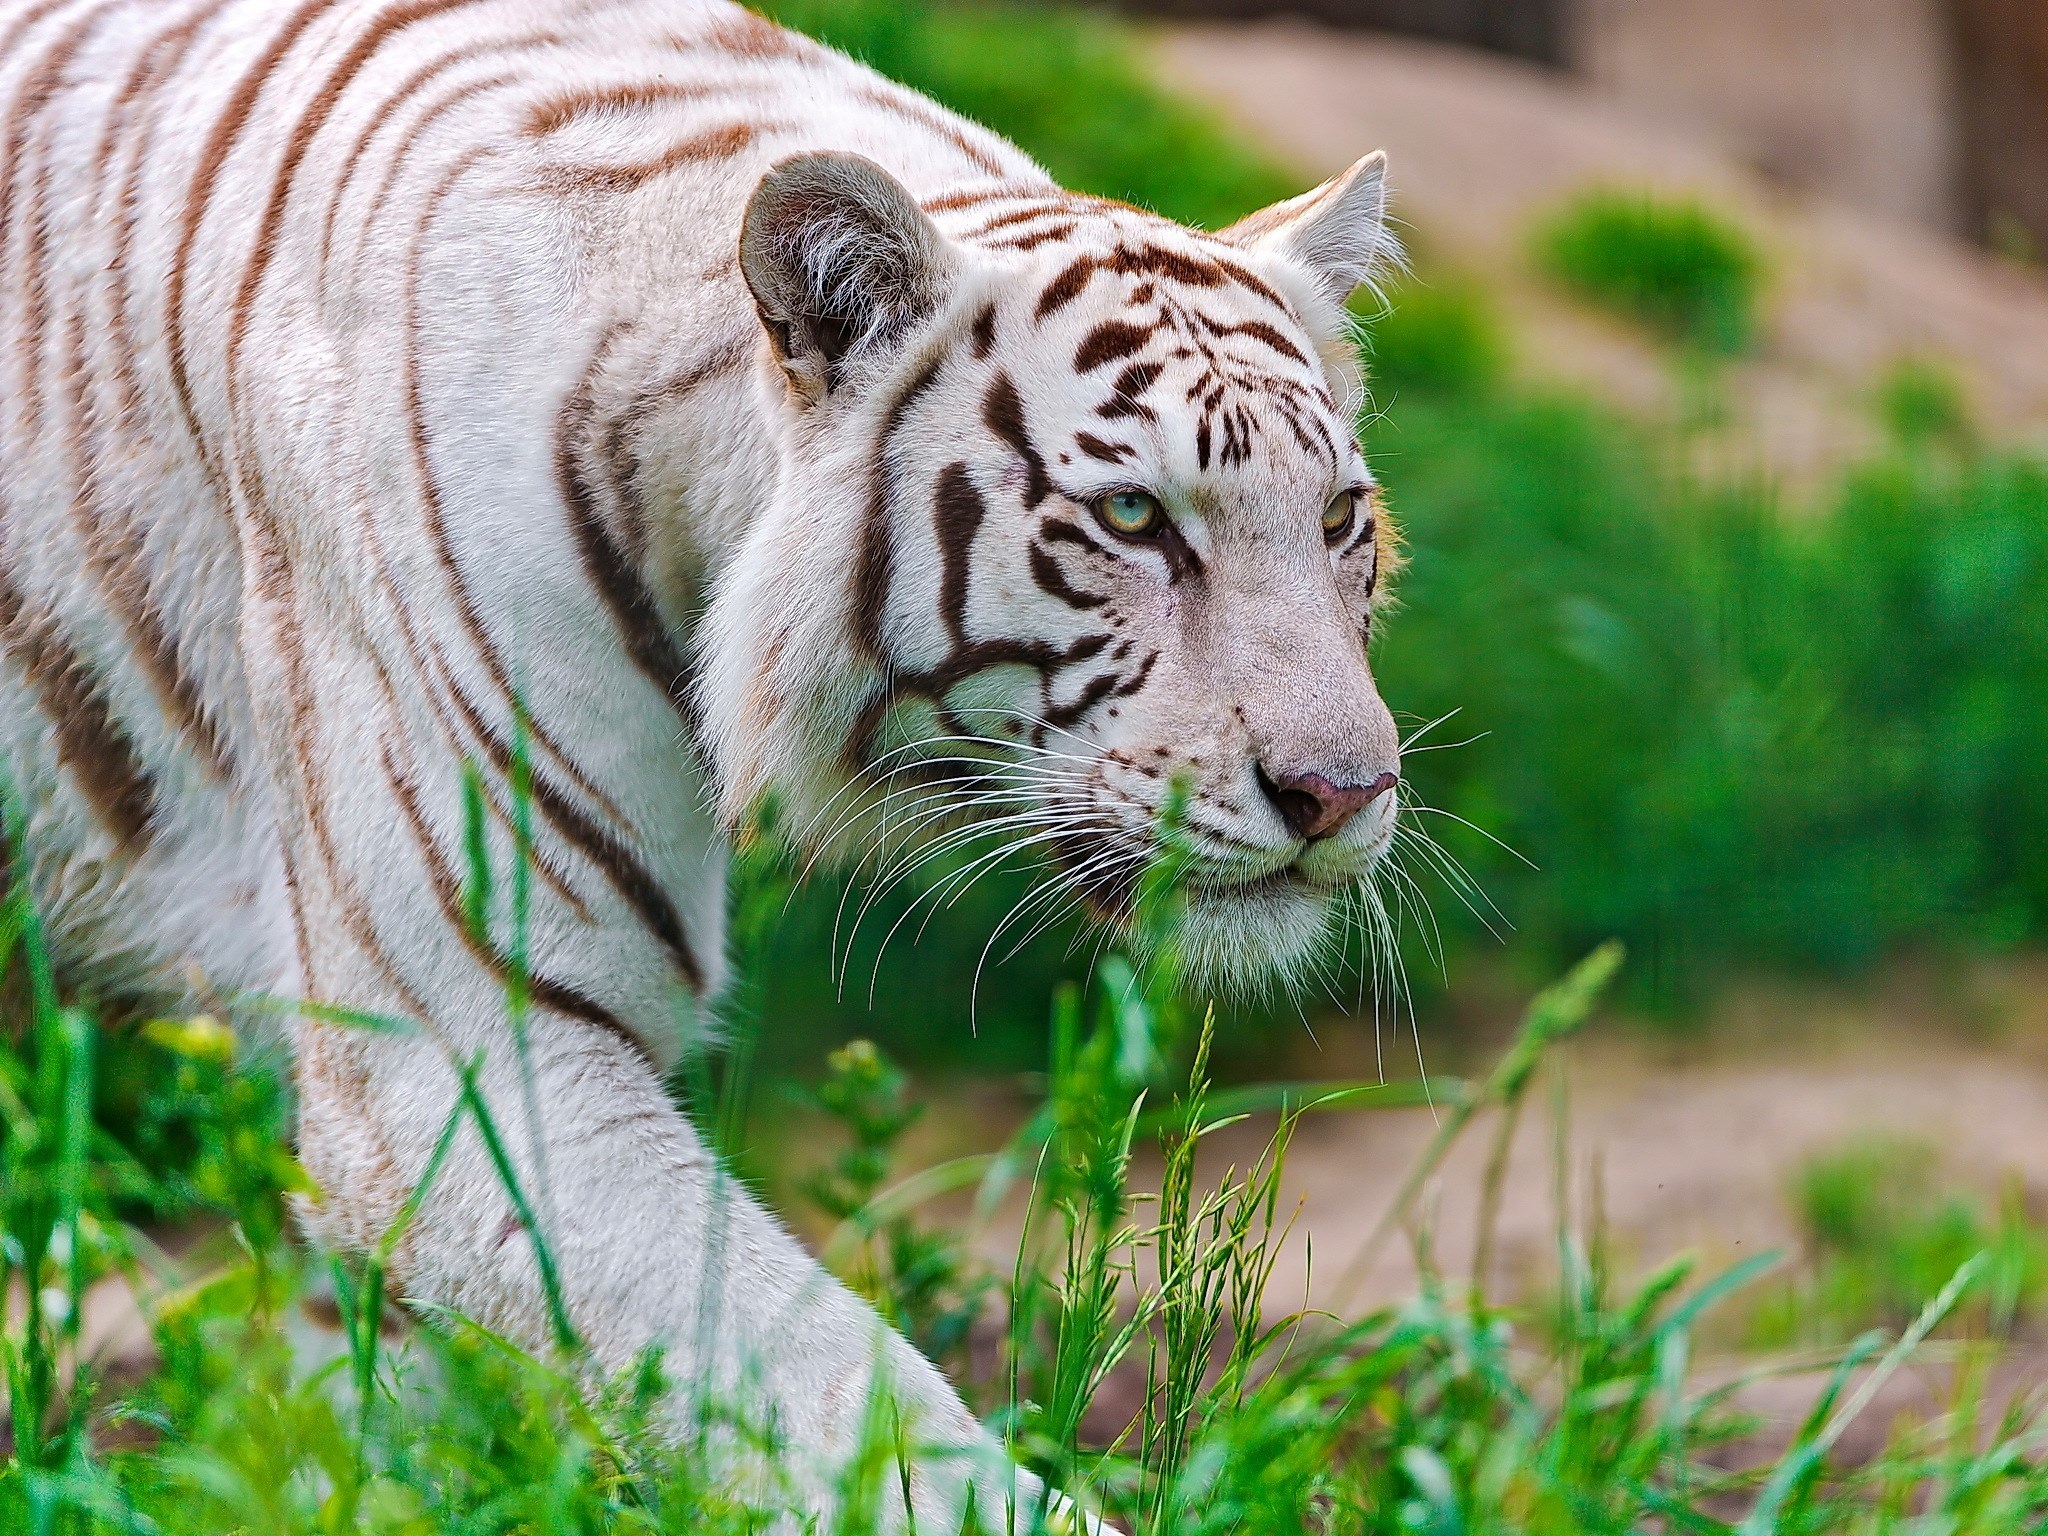 Image: White, tiger, grass, look, sneaks